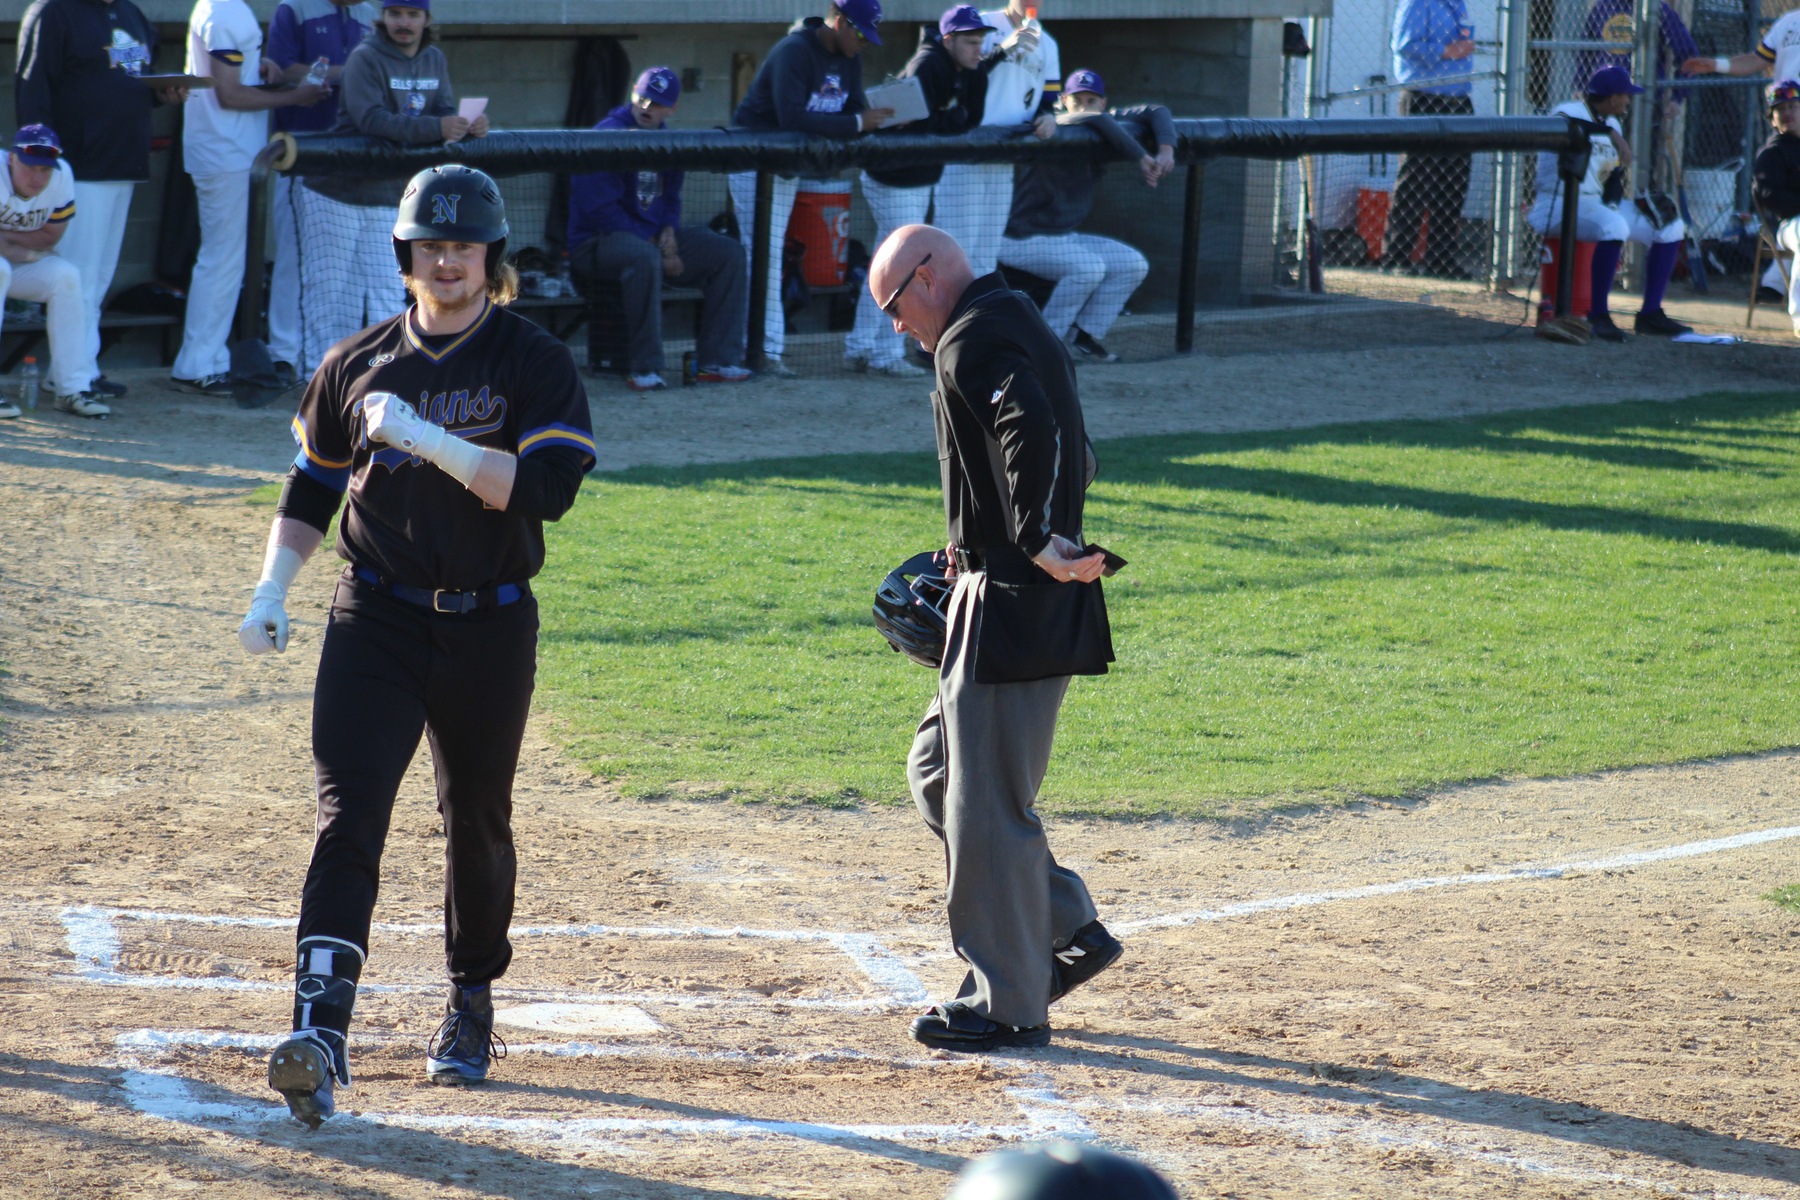 NIACC's Fox Leum crosses home plate after hitting a home run in the second game of Friday's doubleheader at Ellsworth.